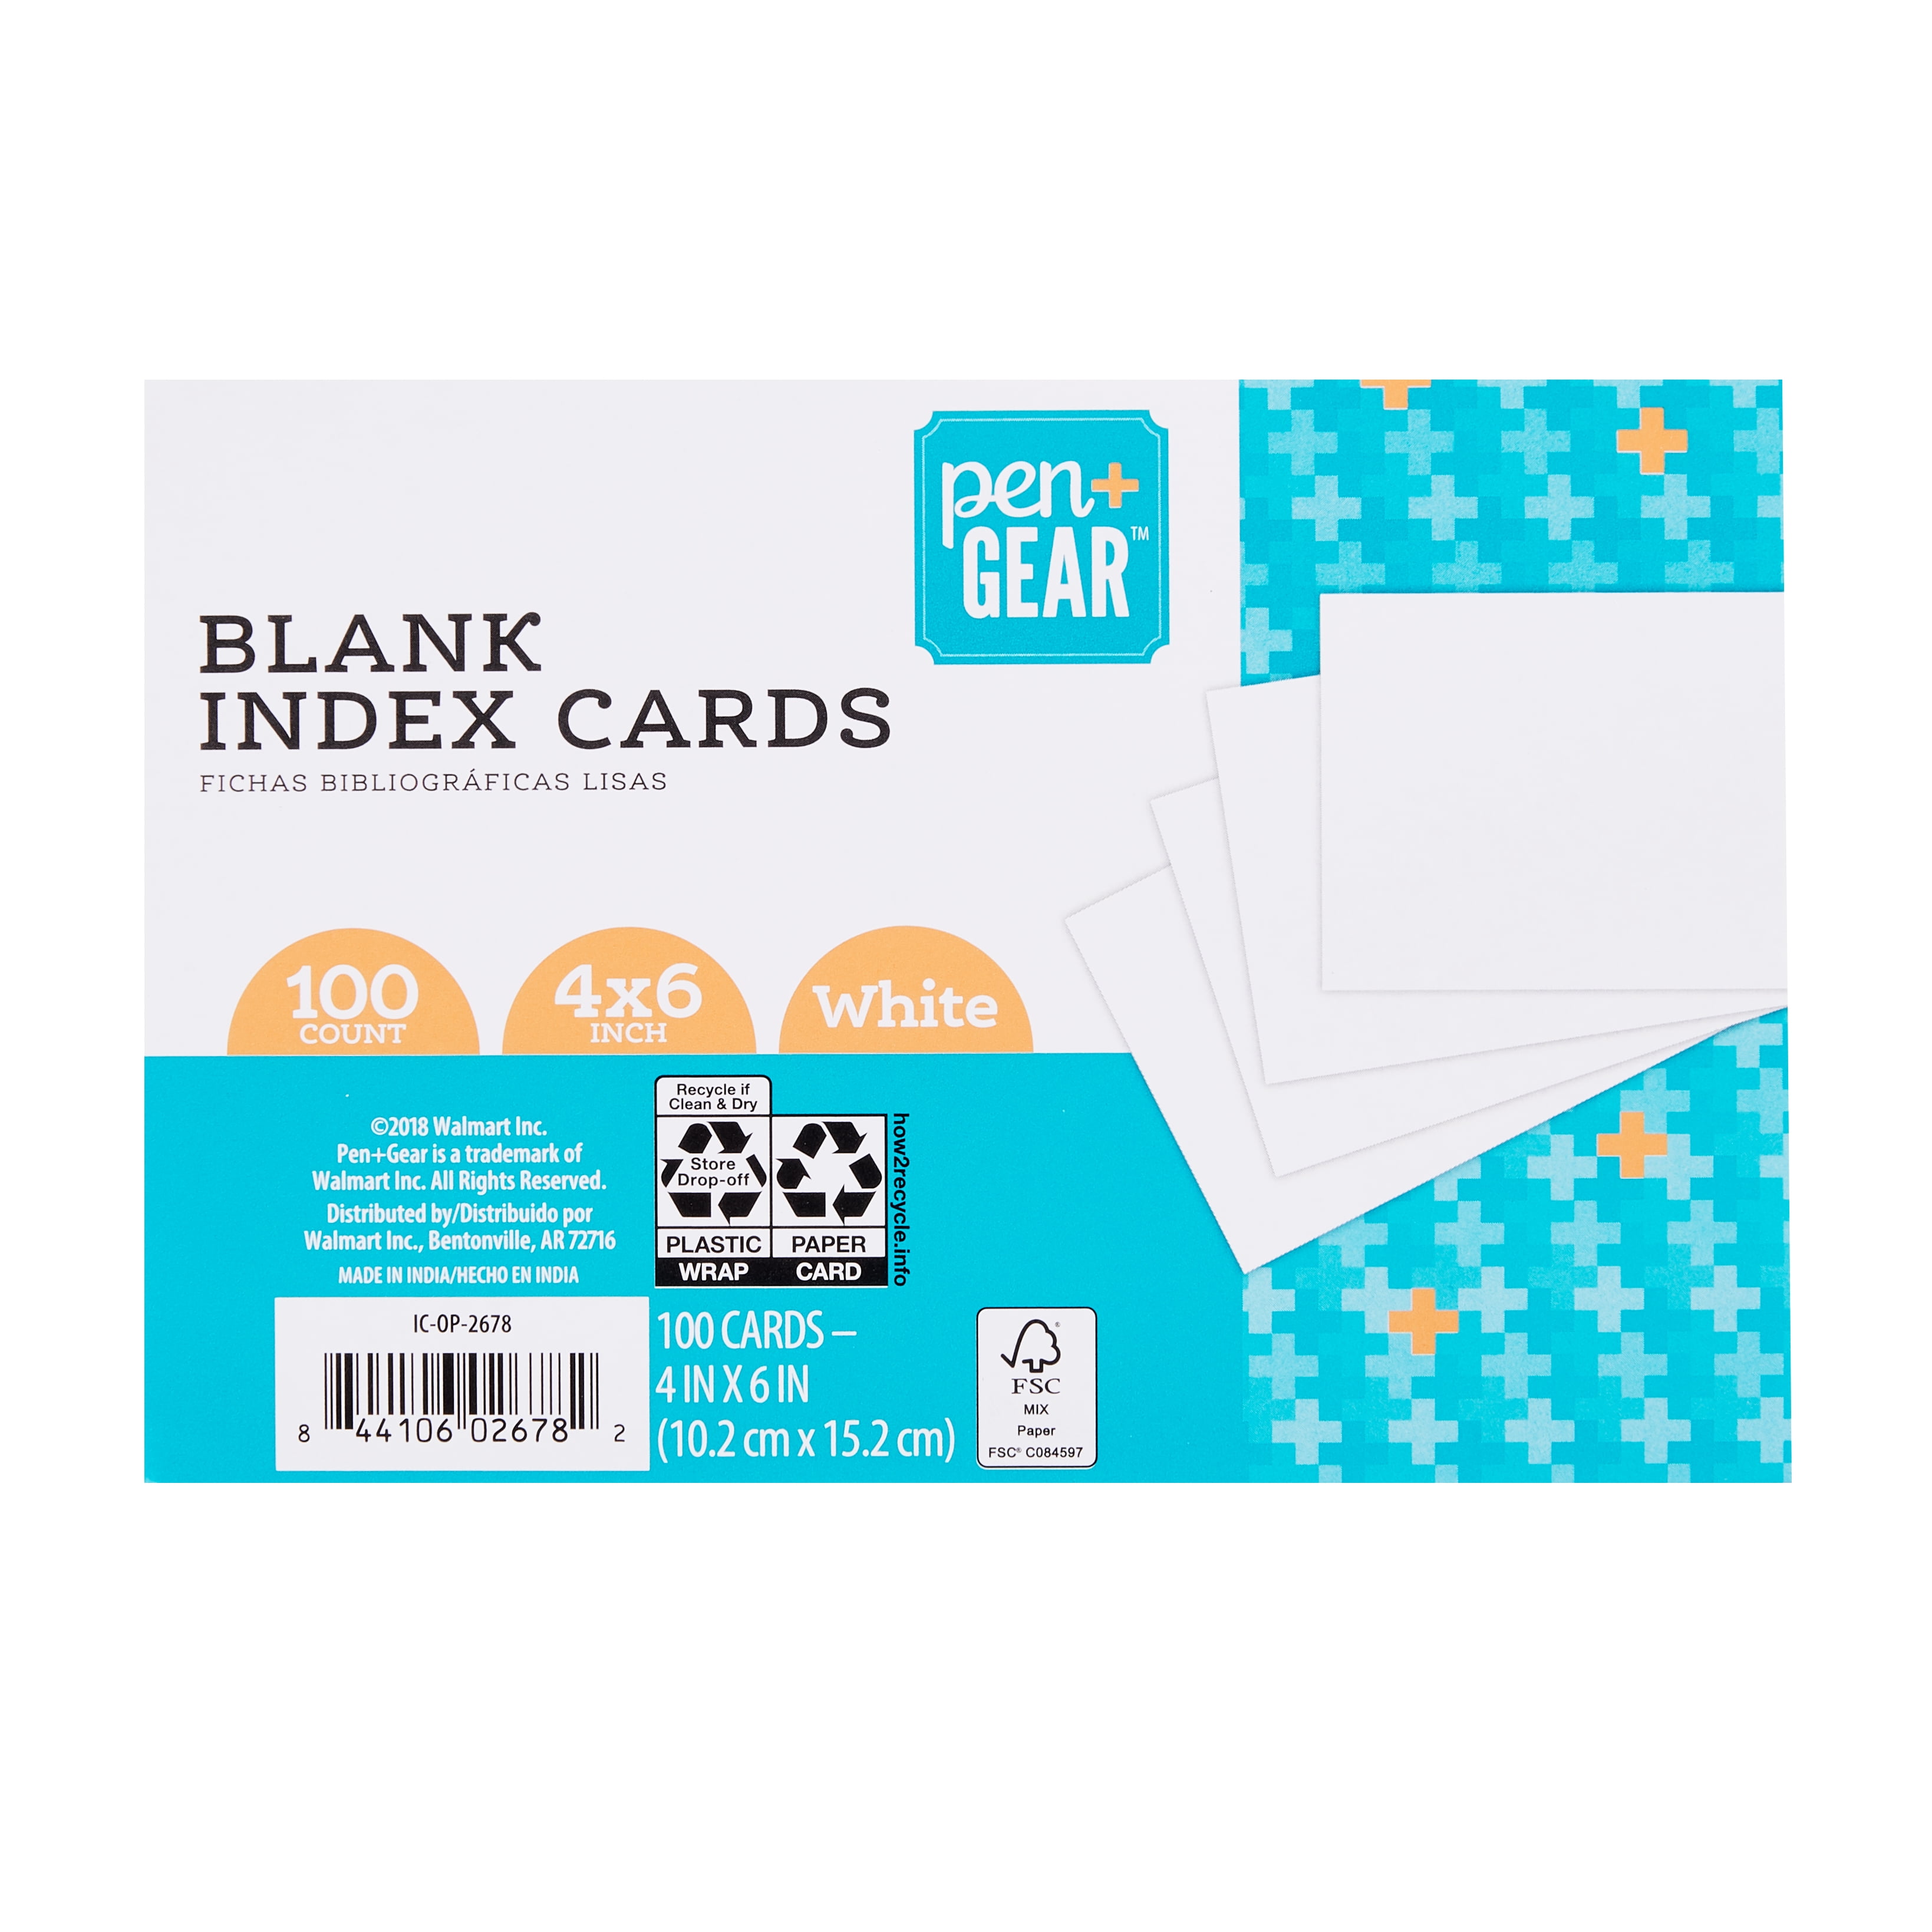 iScholar White Unruled Index Cards 5 X 8-Inch 100 Cards